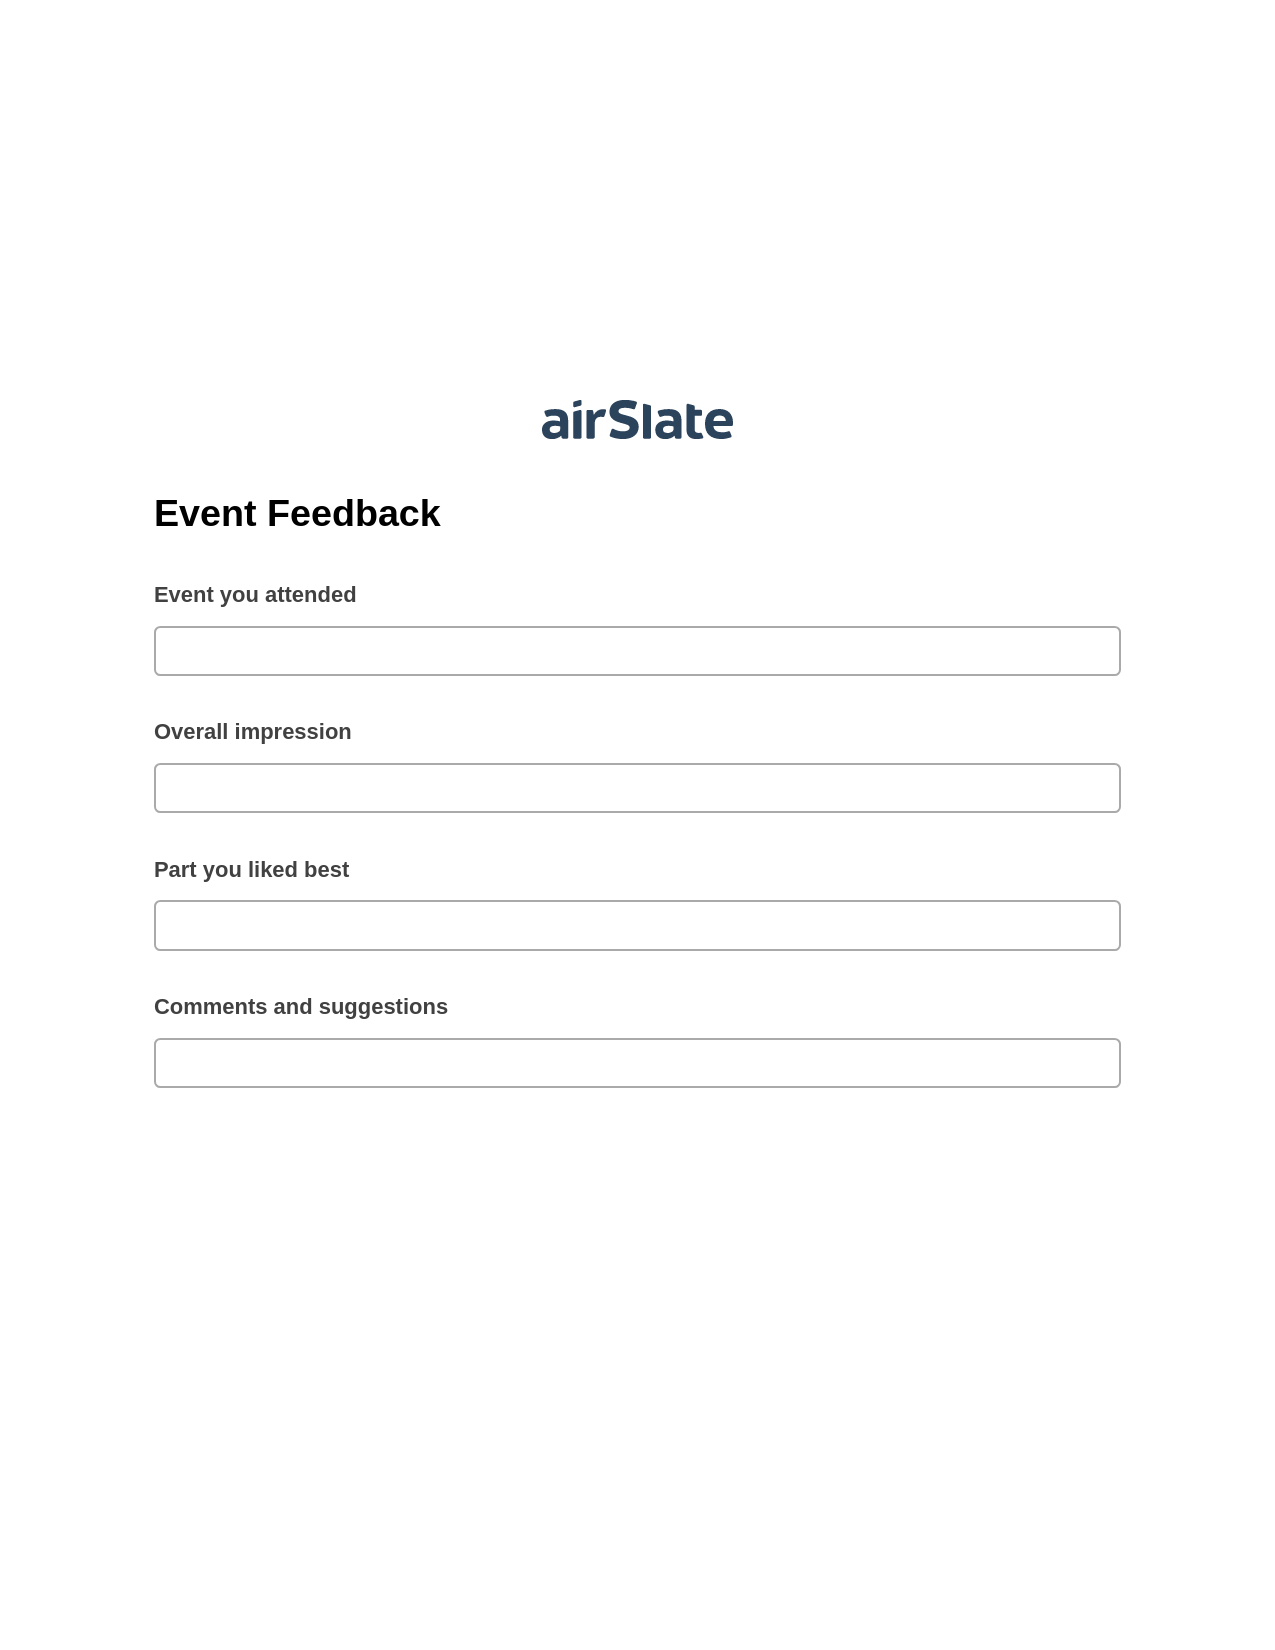 Event Feedback Pre-fill from another Slate Bot, Unassign Role Bot, Email Notification Postfinish Bot